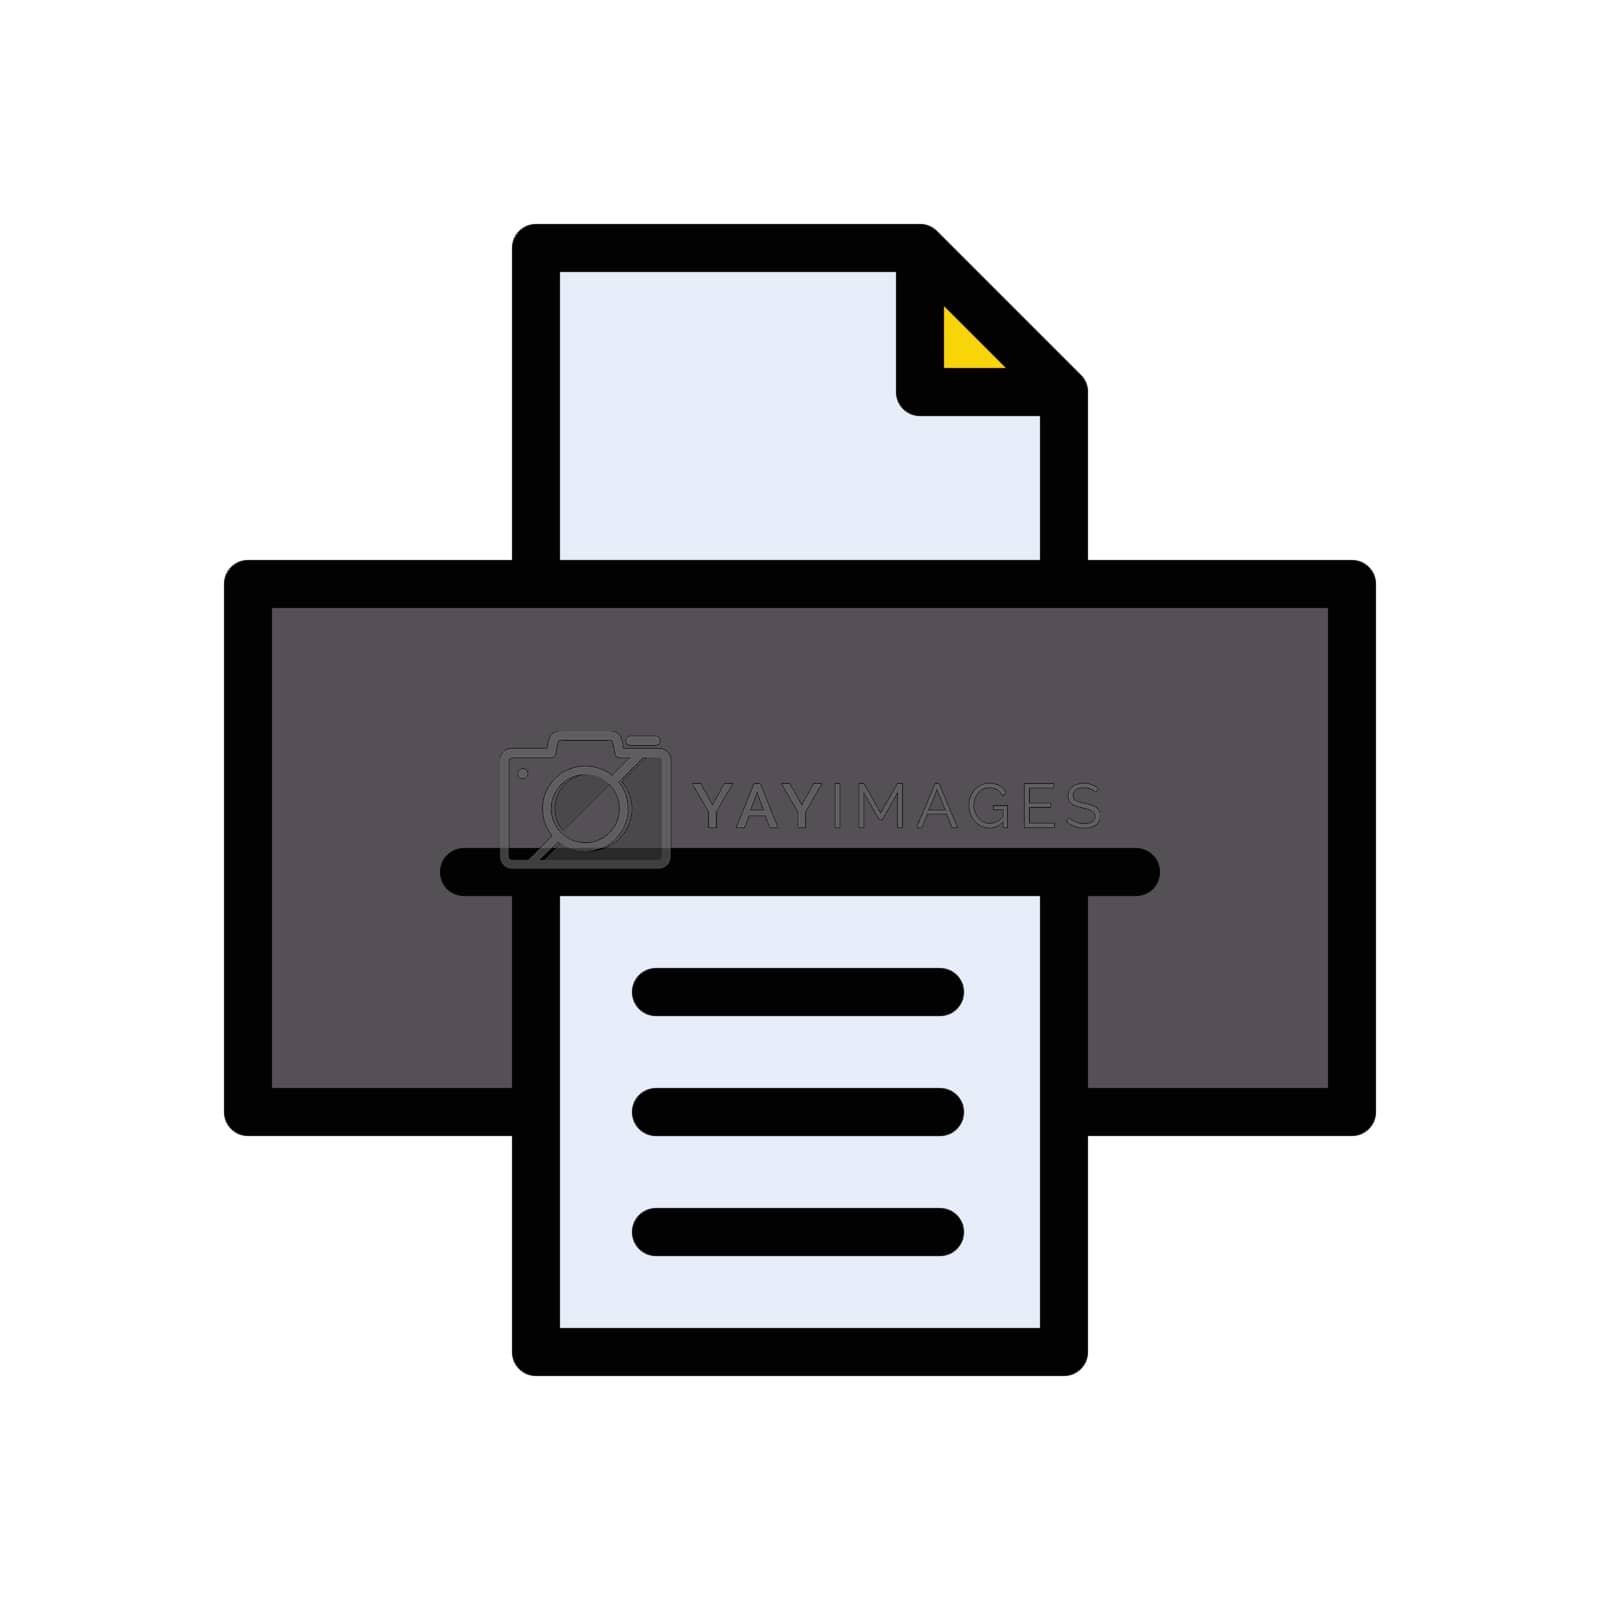 Royalty free image of fax by vectorstall